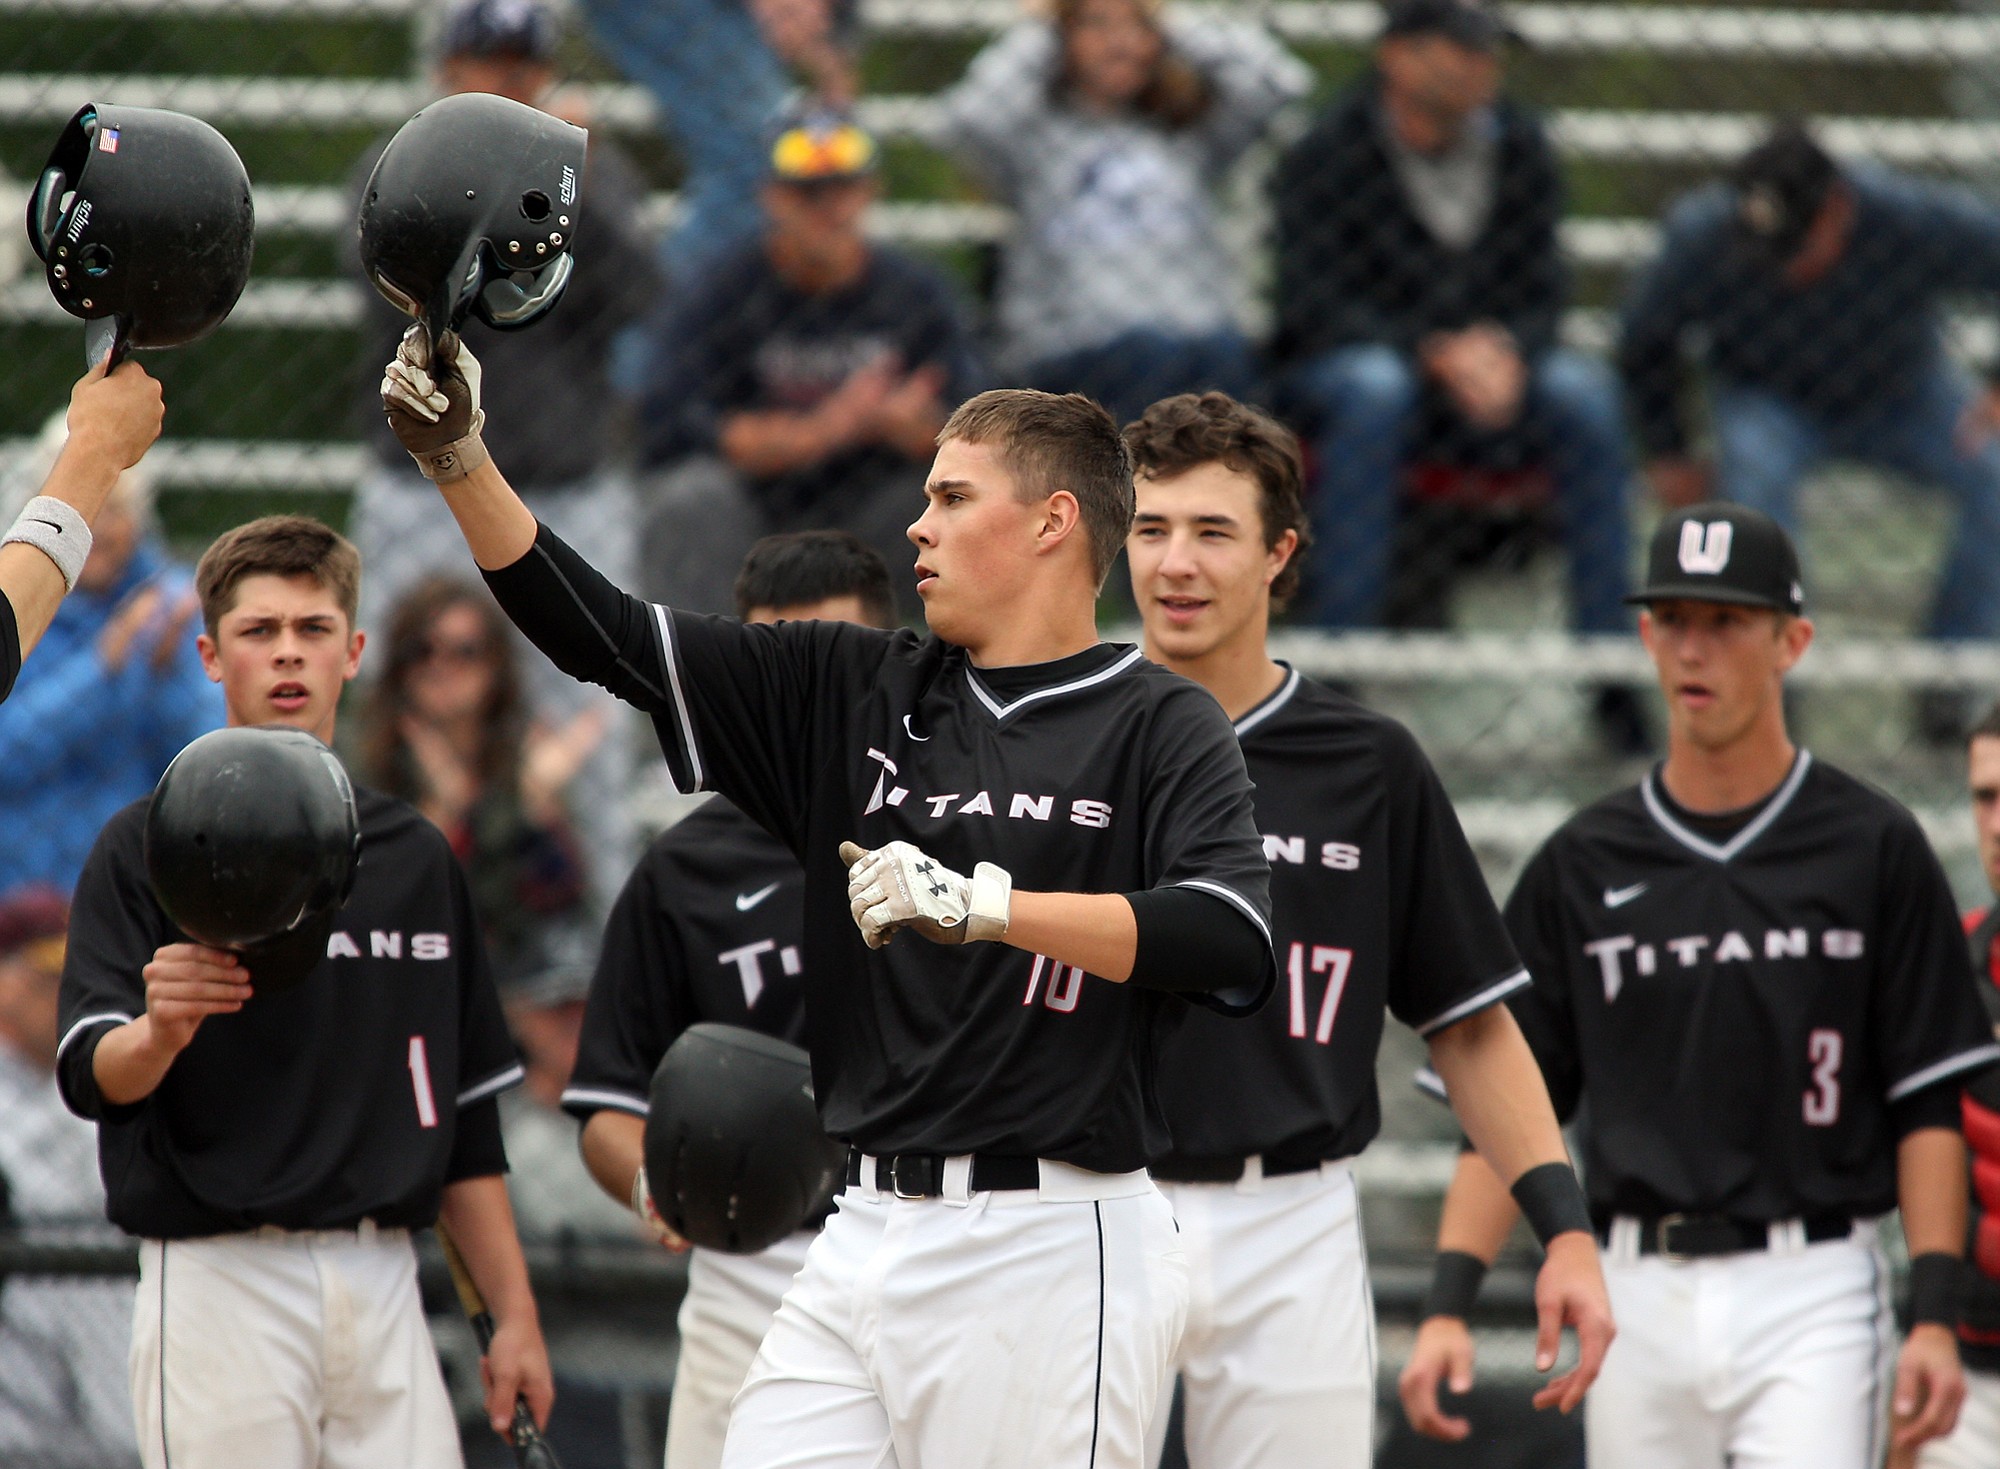 Union's Cody Hawken (16) bumps helmets with teammates after hitting a two run homer in the 1st inning against Kentwood in 4A WIAA State Baseball tournament at Hiedelberg Park in Tacoma on May 23.